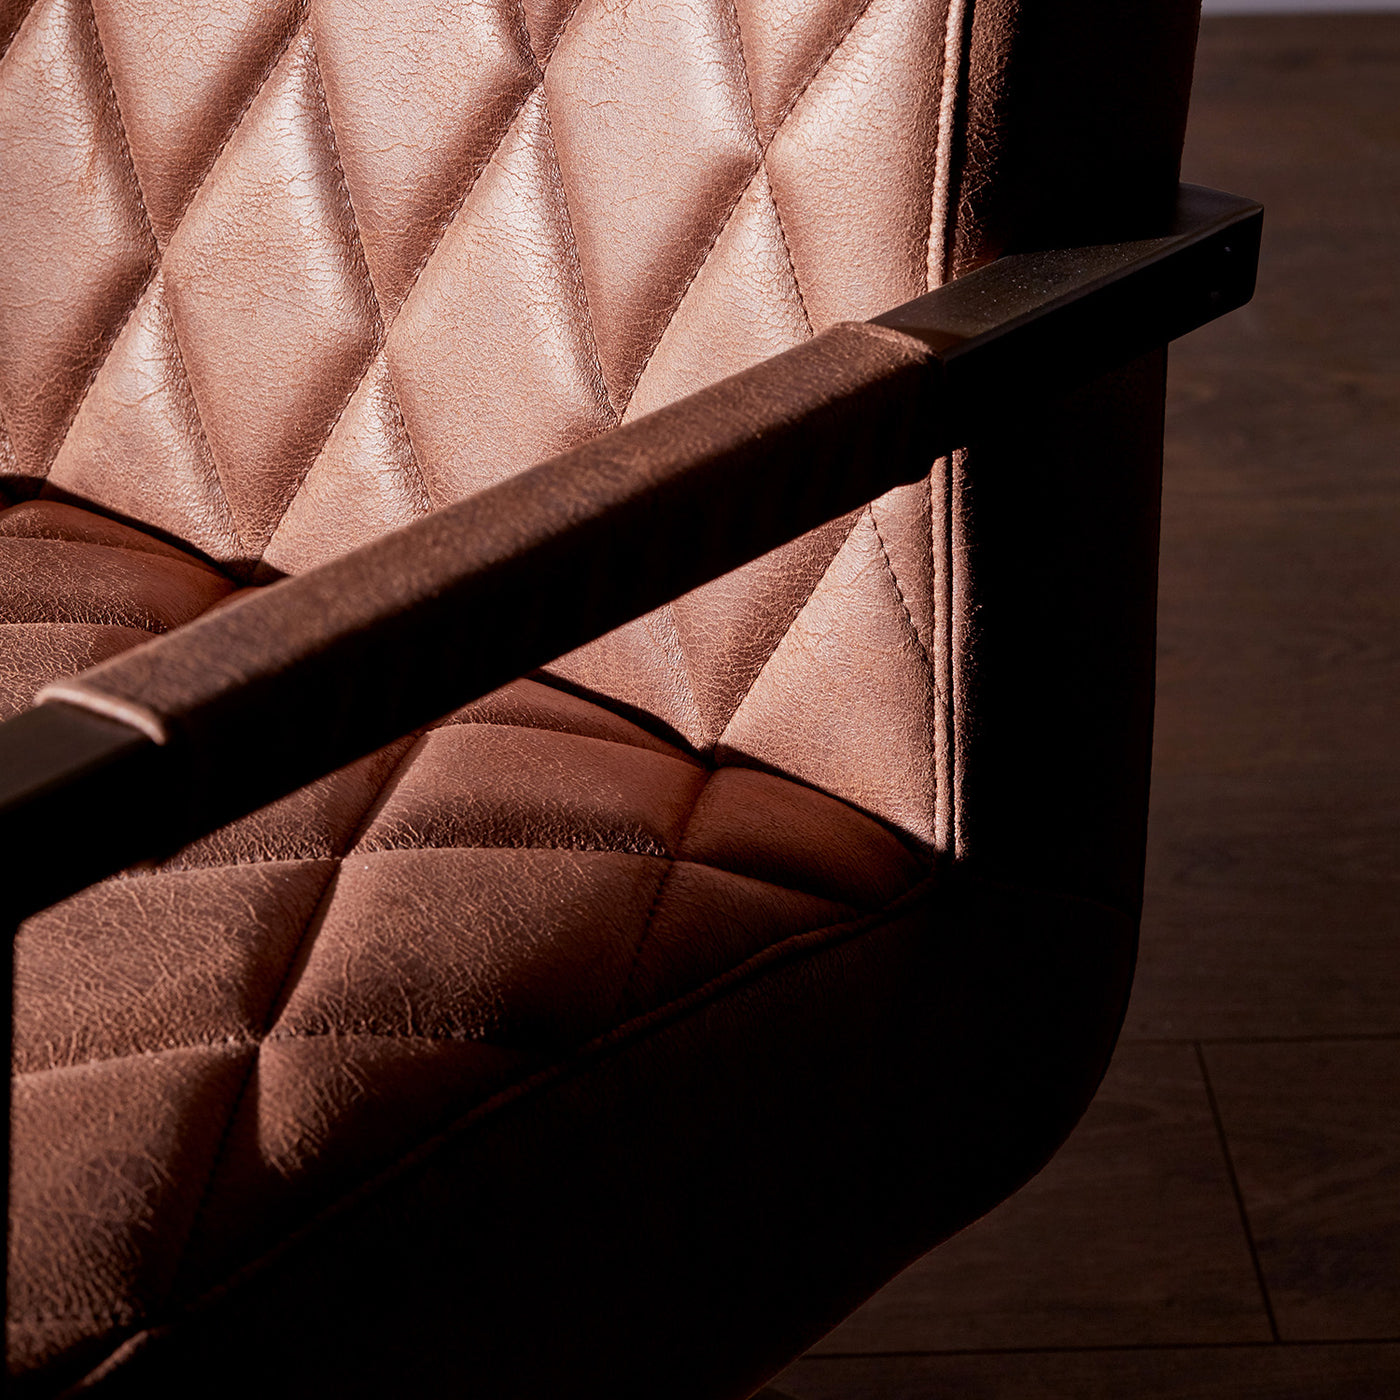 Bronson Faux Leather Armchair in Vintage Brown